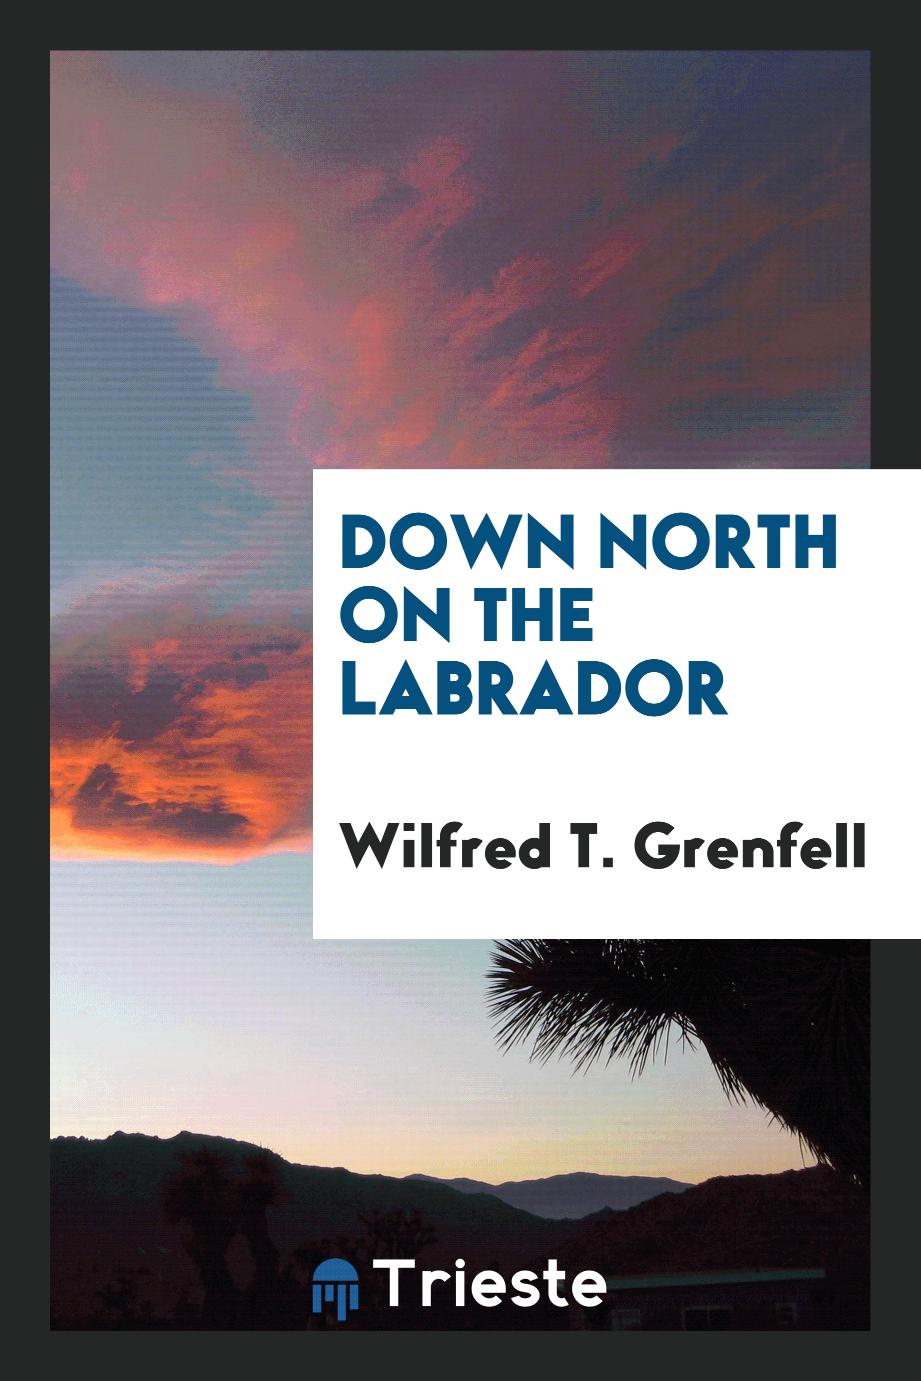 Wilfred T. Grenfell - Down North on the Labrador